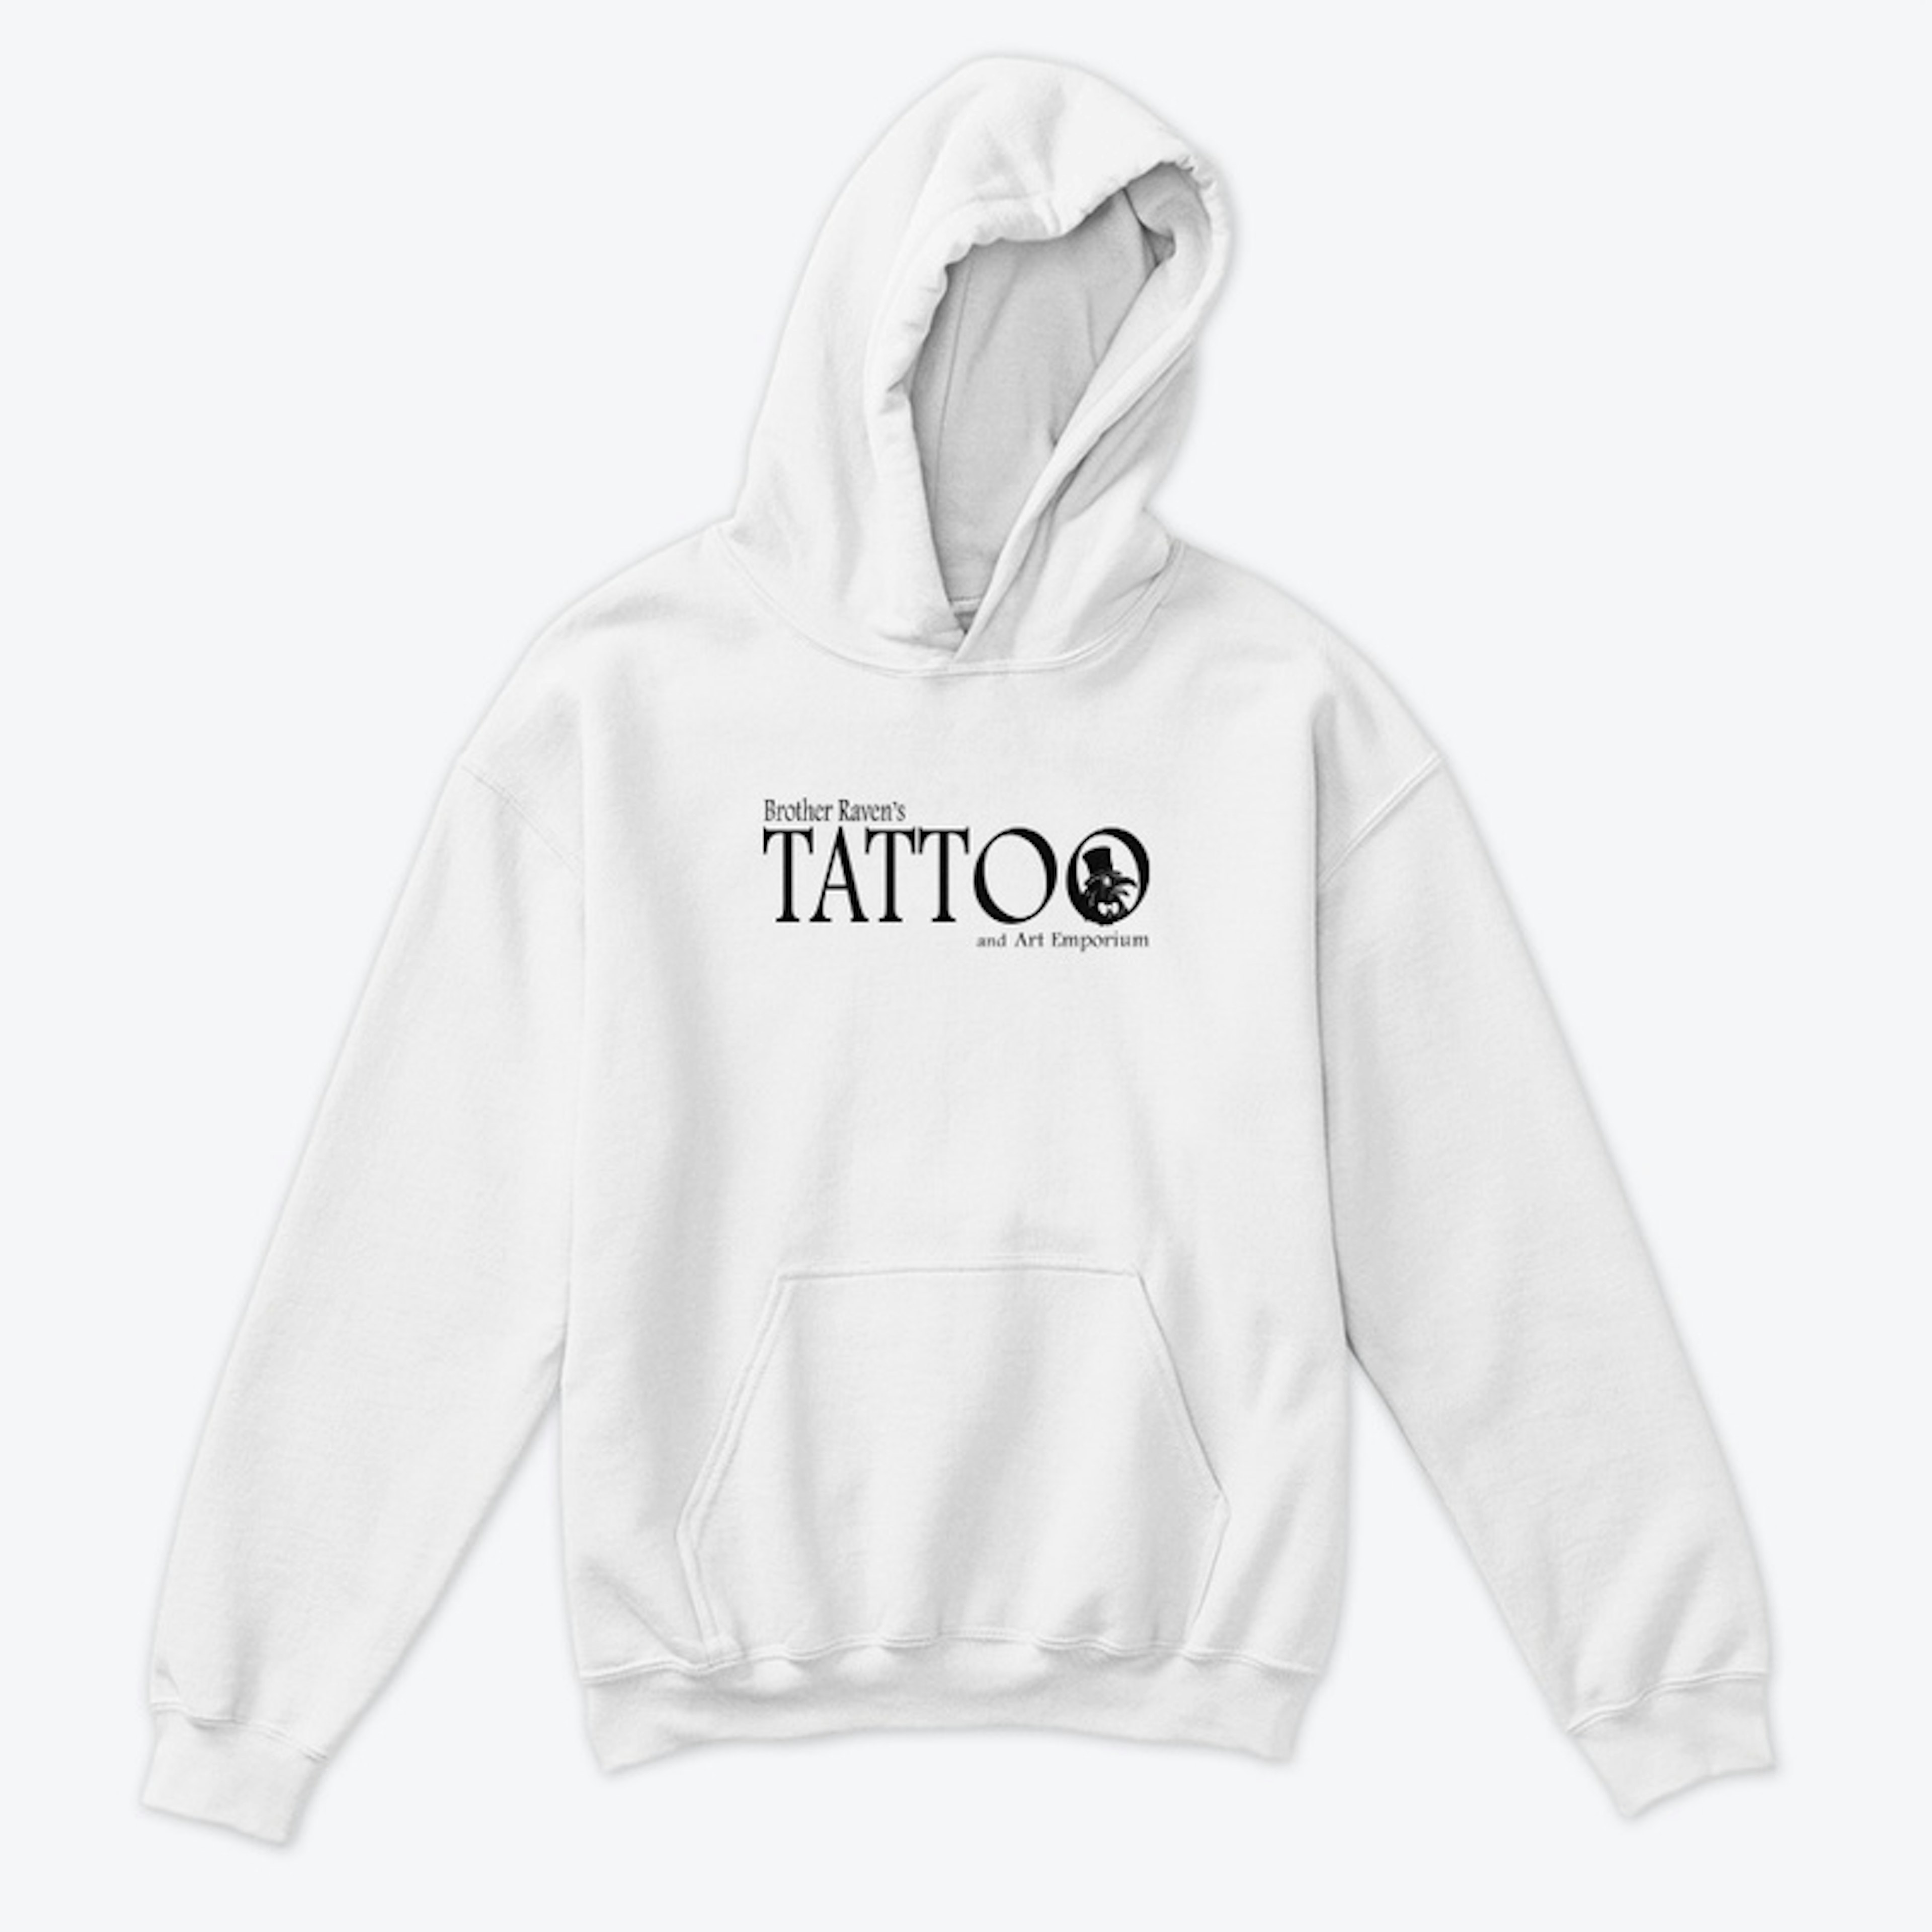 Brother Raven's Front/Back Logo Hoodie